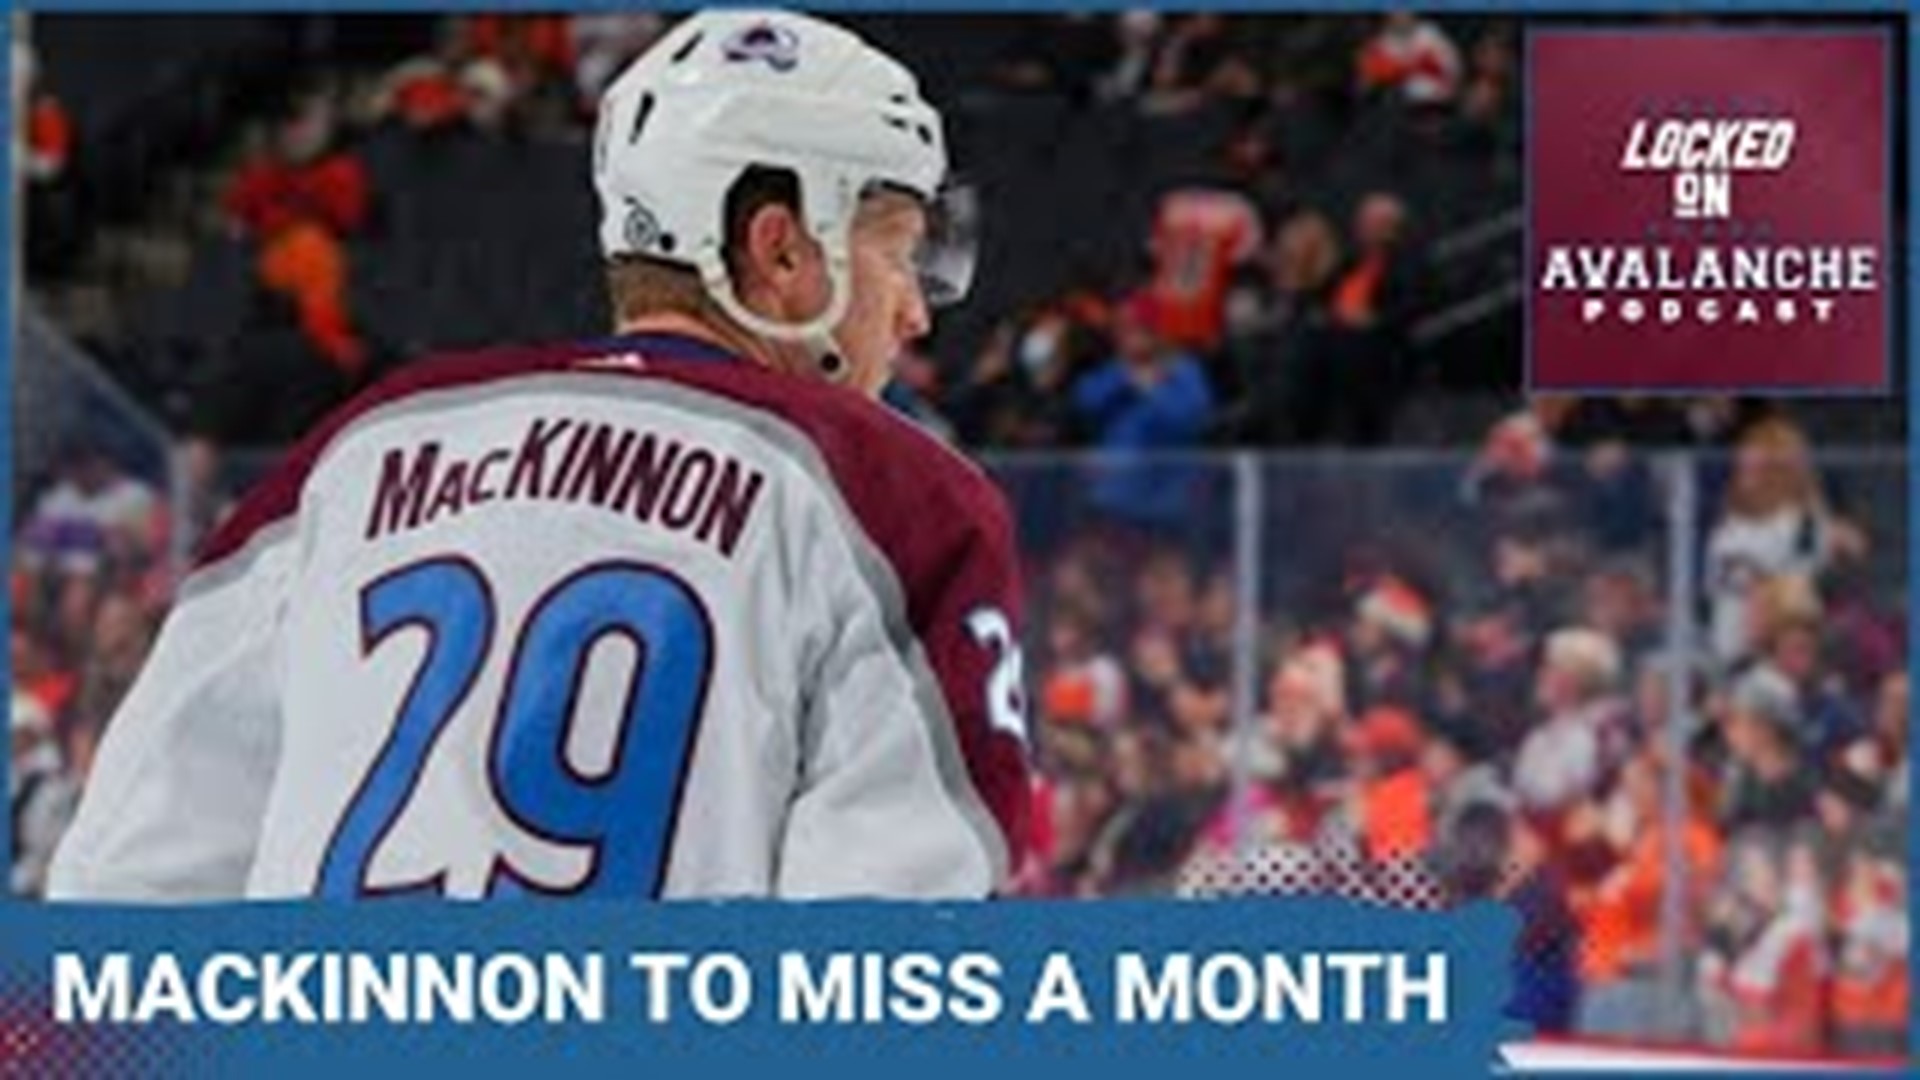 Word came down from the Colorado Avalanche yesterday that Nathan MacKinnon will miss the next 4 weeks due to the injury sustained against the Philadelphia Flyers.